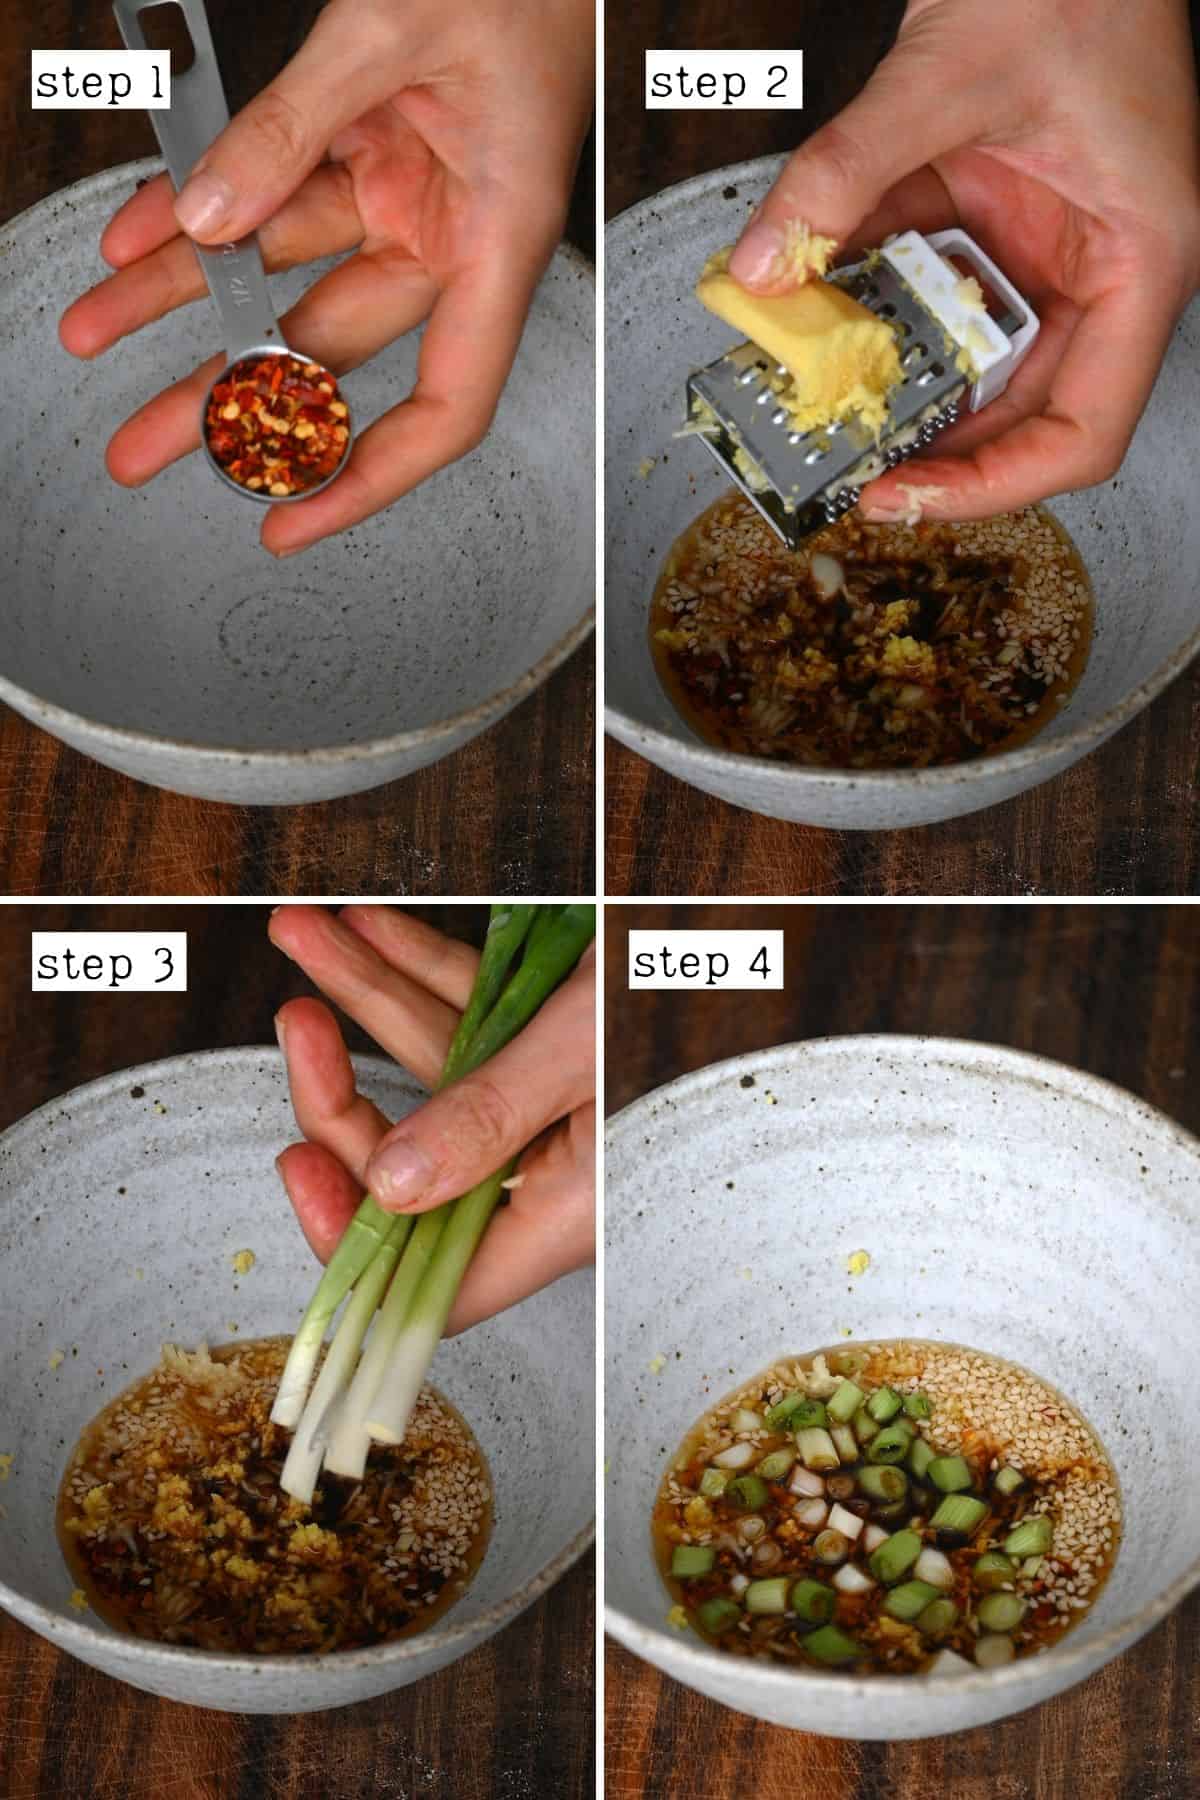 Steps for mixing chili spices for noodles